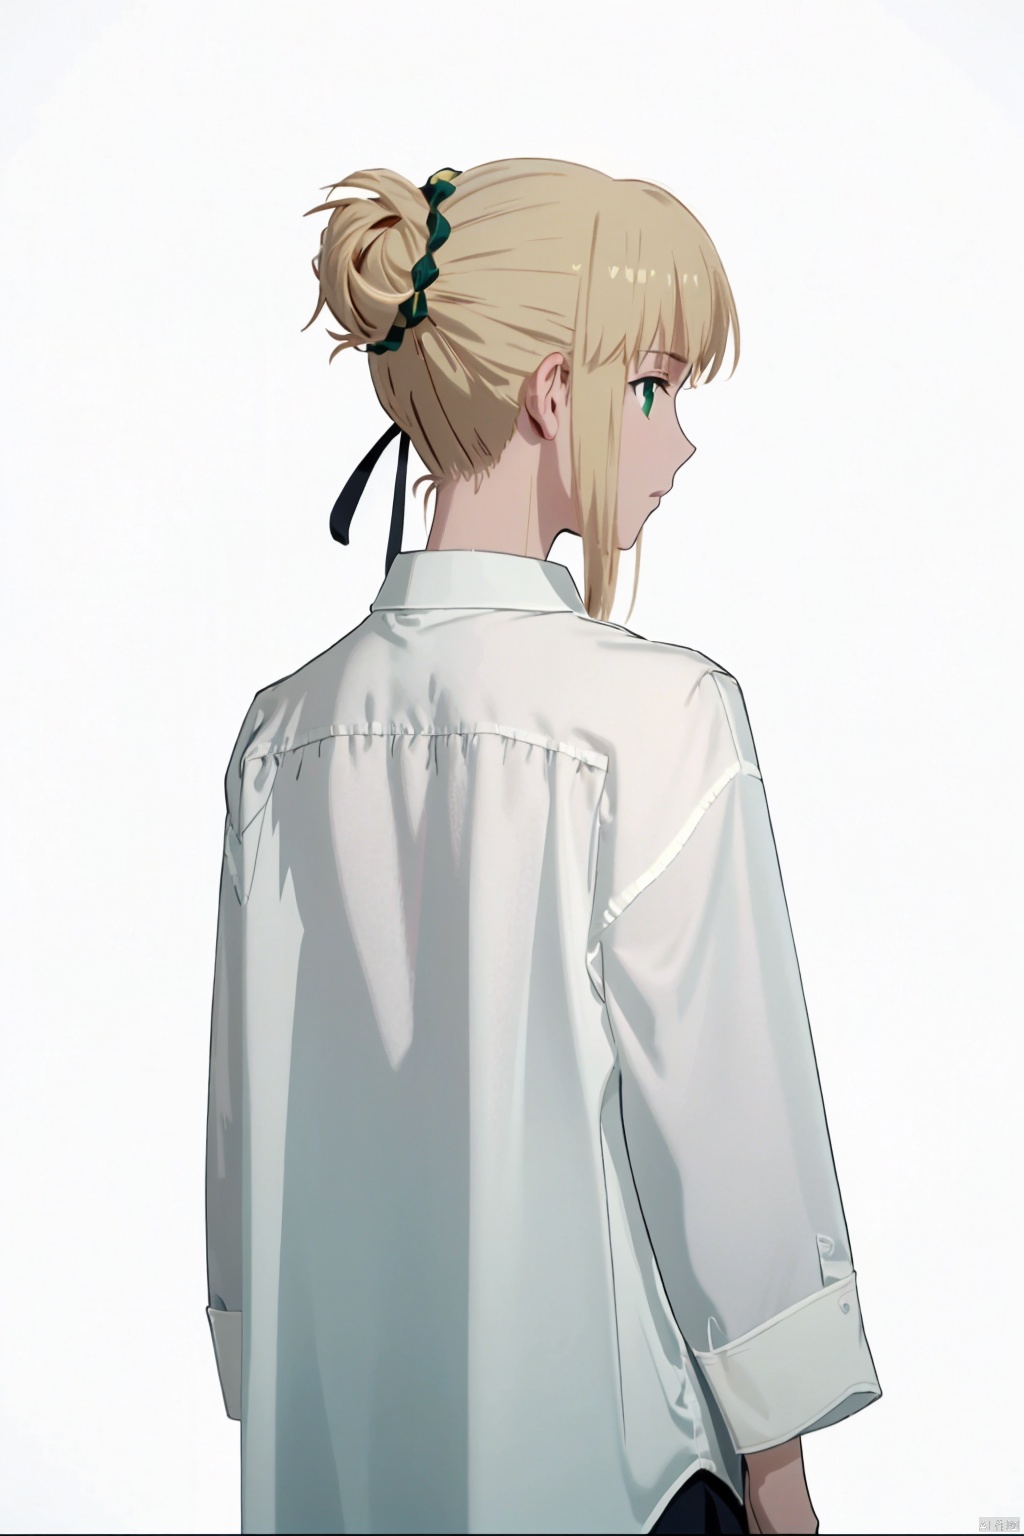 1 girl, focused, solo, looking back, looking from behind, half fallen clothes, shirt, white background, white shirt, looking at the audience, green eyes, boyfriend, comfortable anime, perspective wet T-shirt, soft, hair tied, hair tied, perfect fingers, ((poakl)), phSaber